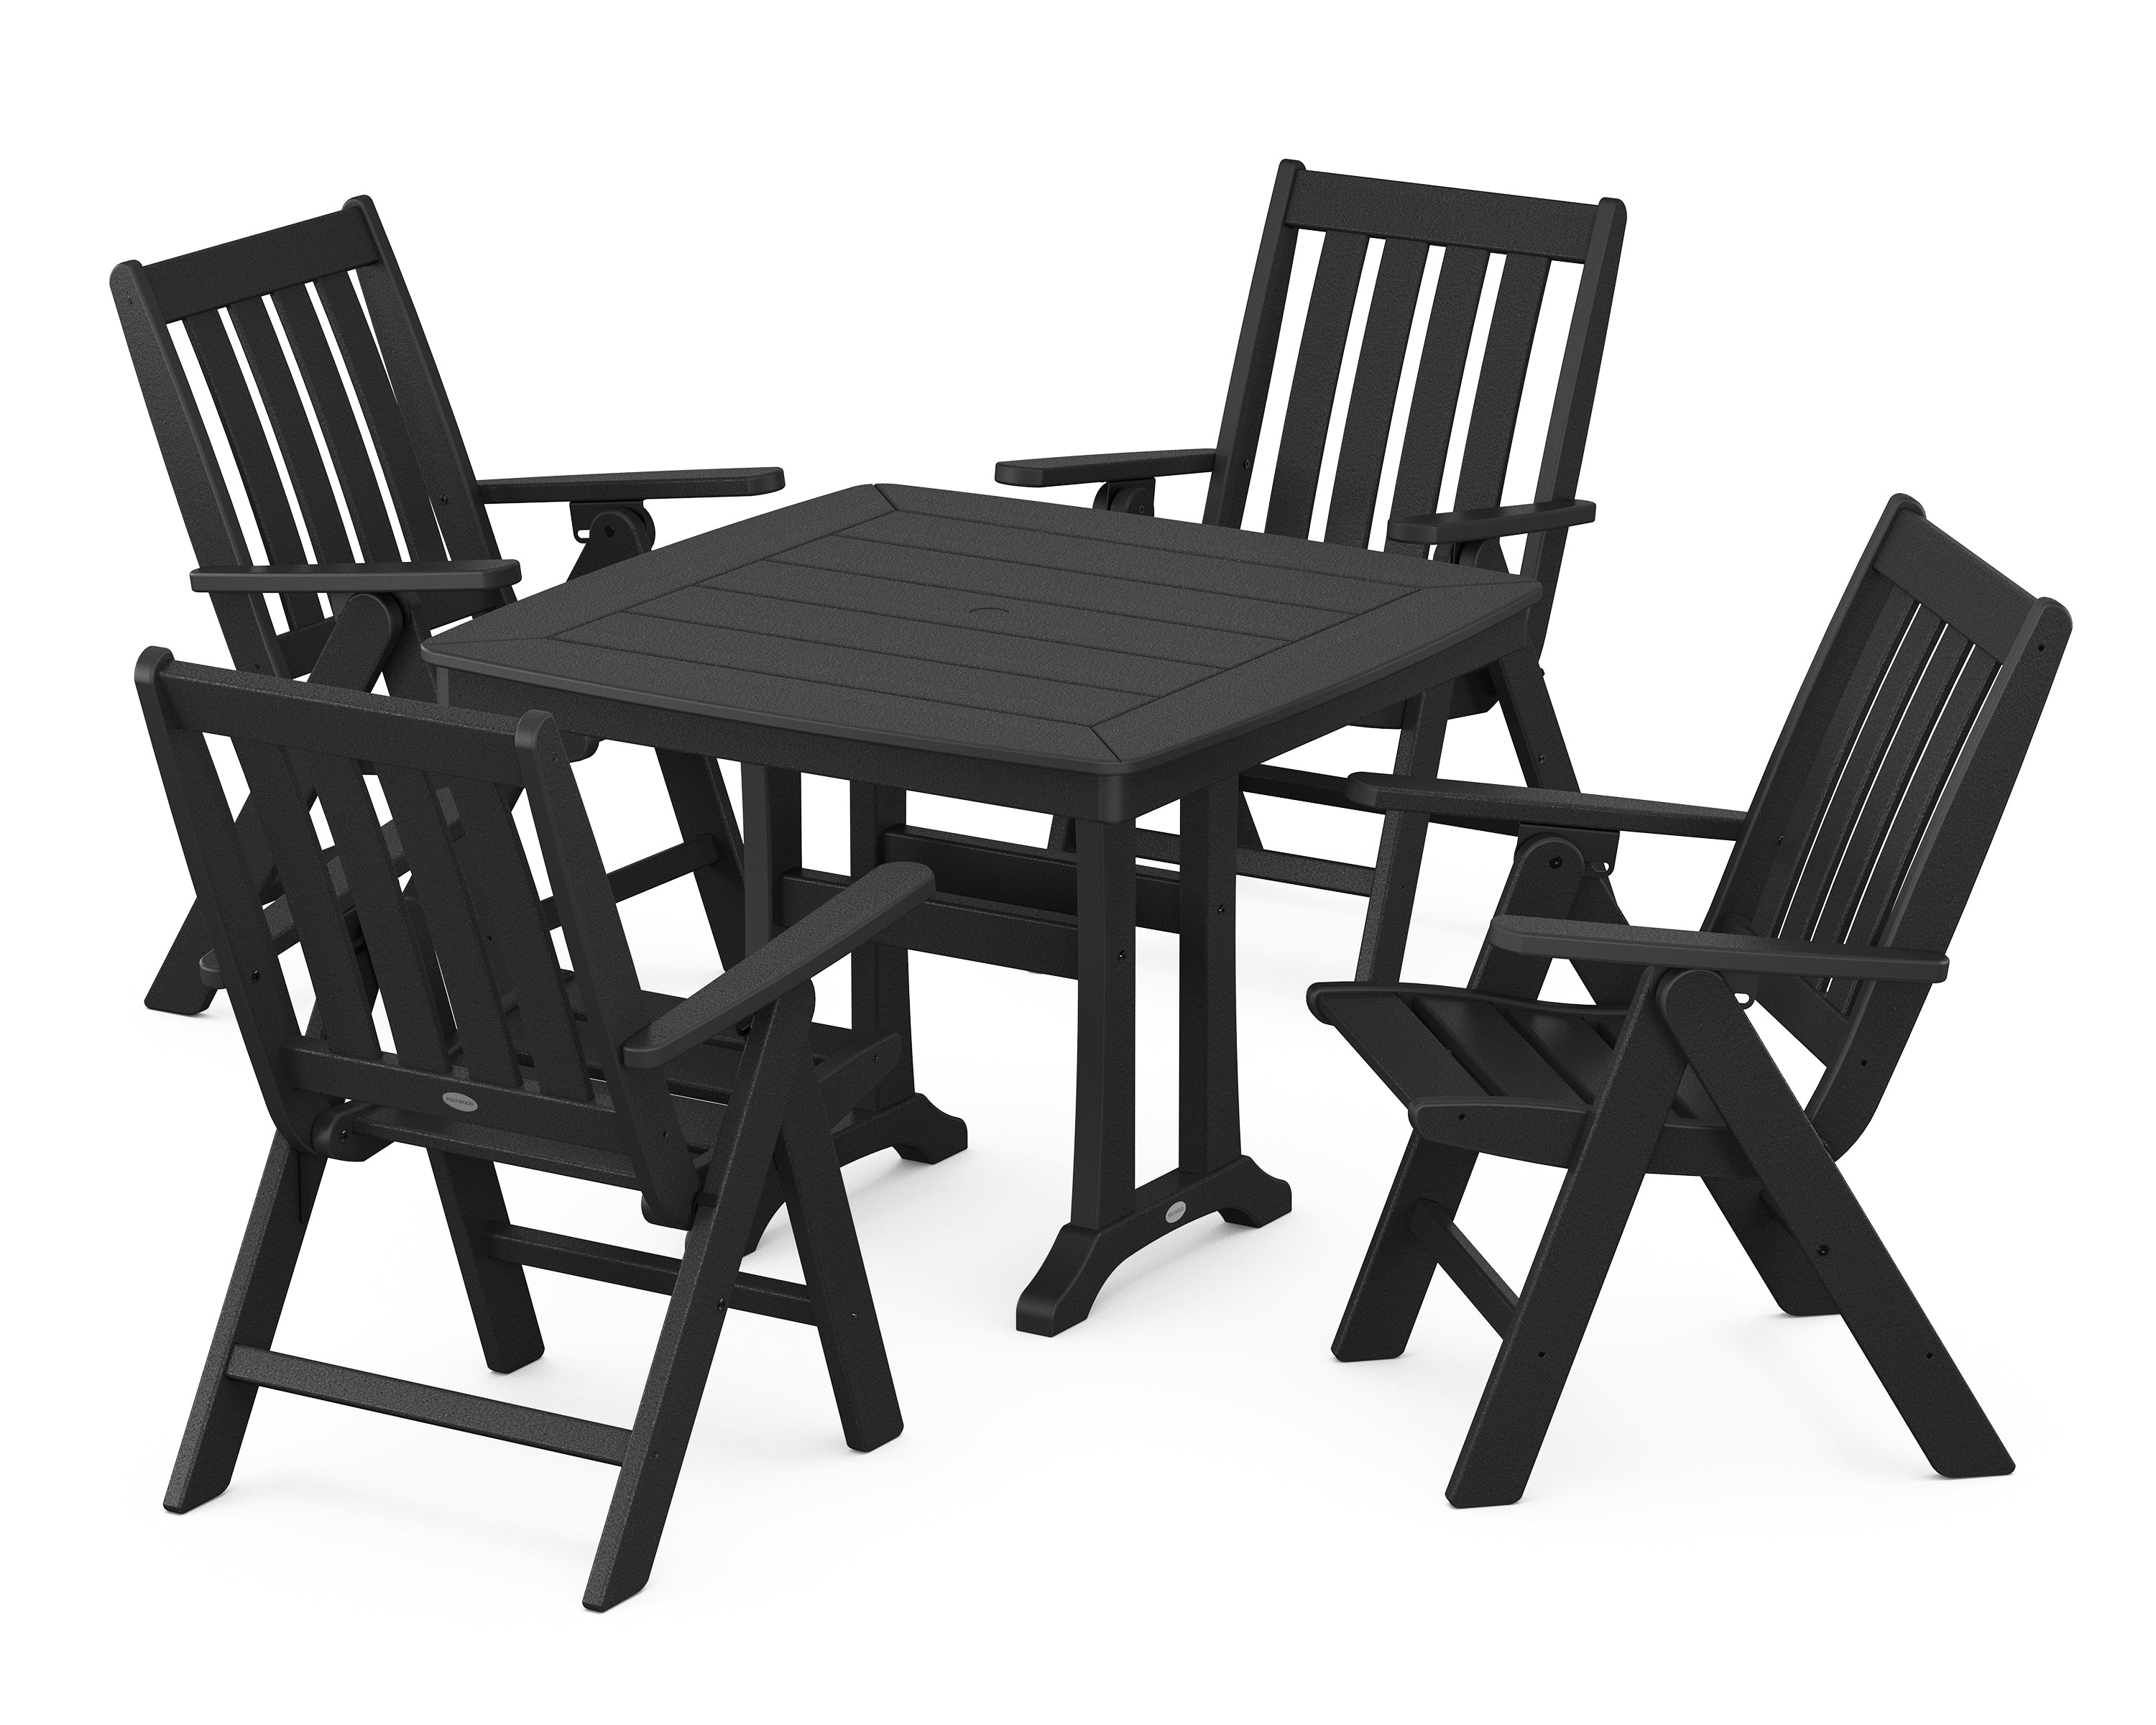 POLYWOOD® Vineyard Folding 5-Piece Dining Set with Trestle Legs in Black